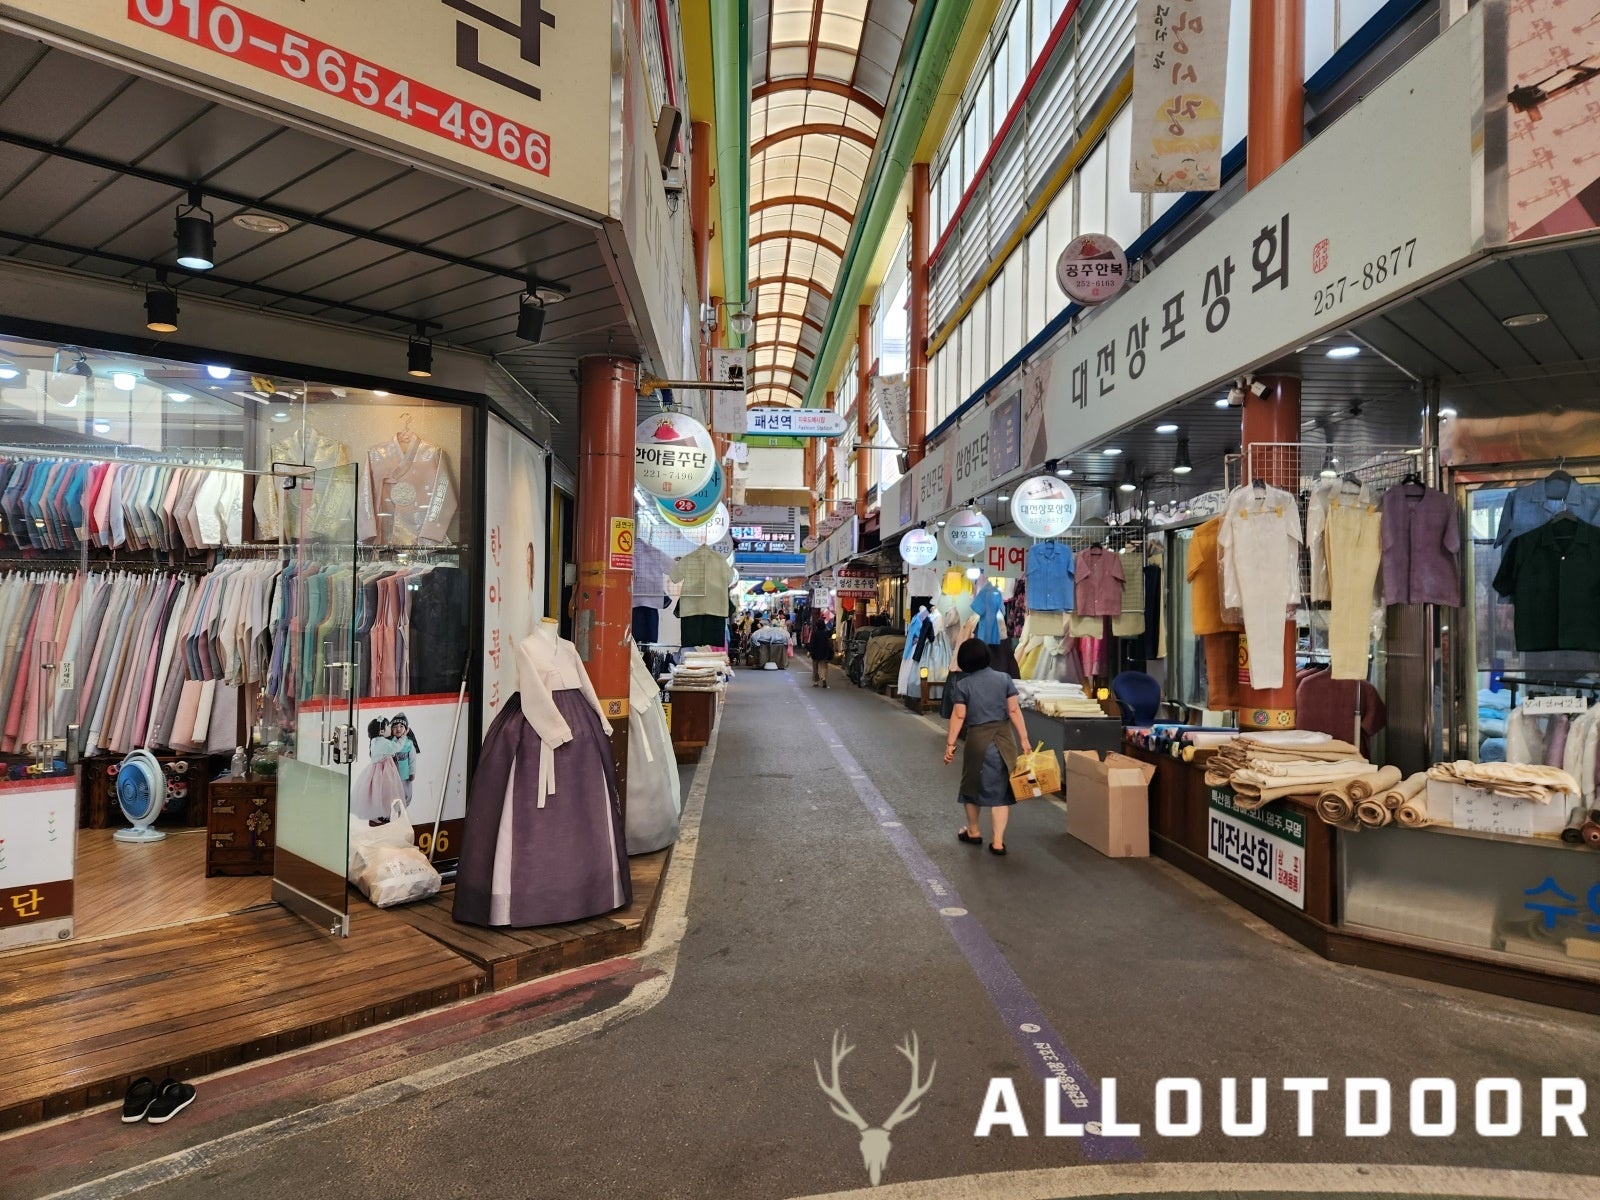 A Day in South Korea - Daejeon Jungang Open Air Market